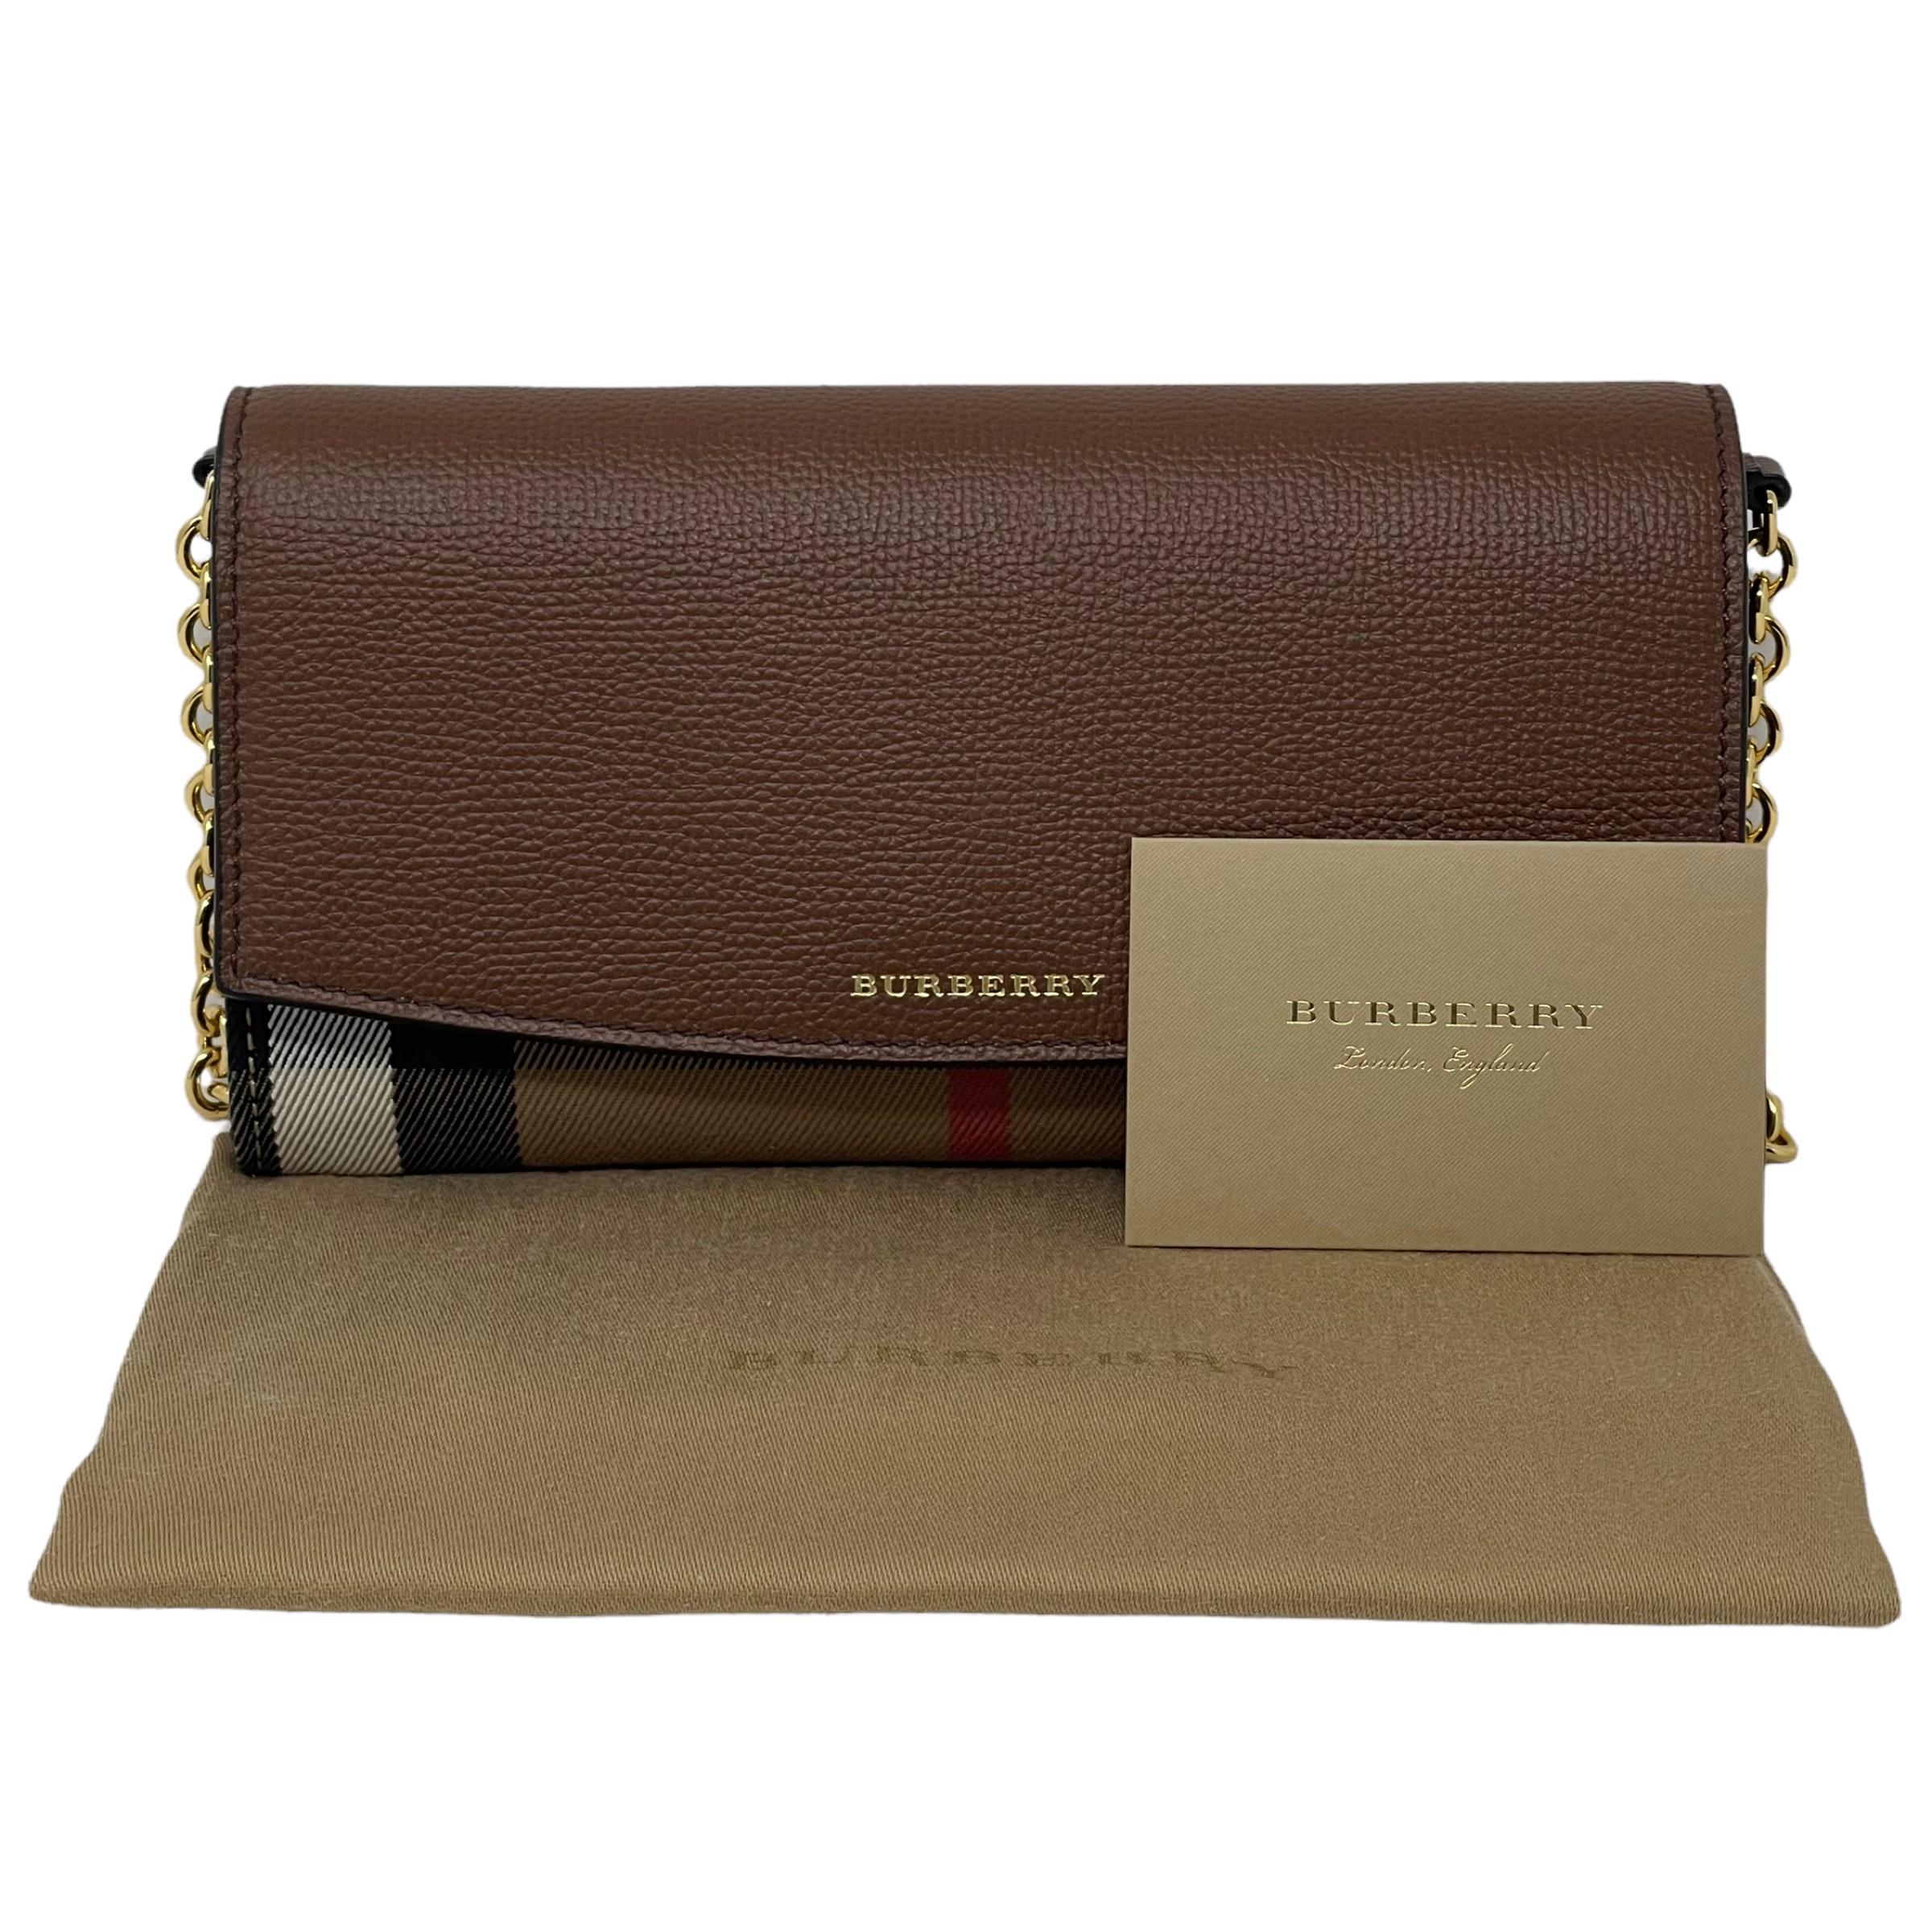 NEW Burberry Brown Henley House Check Leather Clutch Crossbody Bag For Sale 8